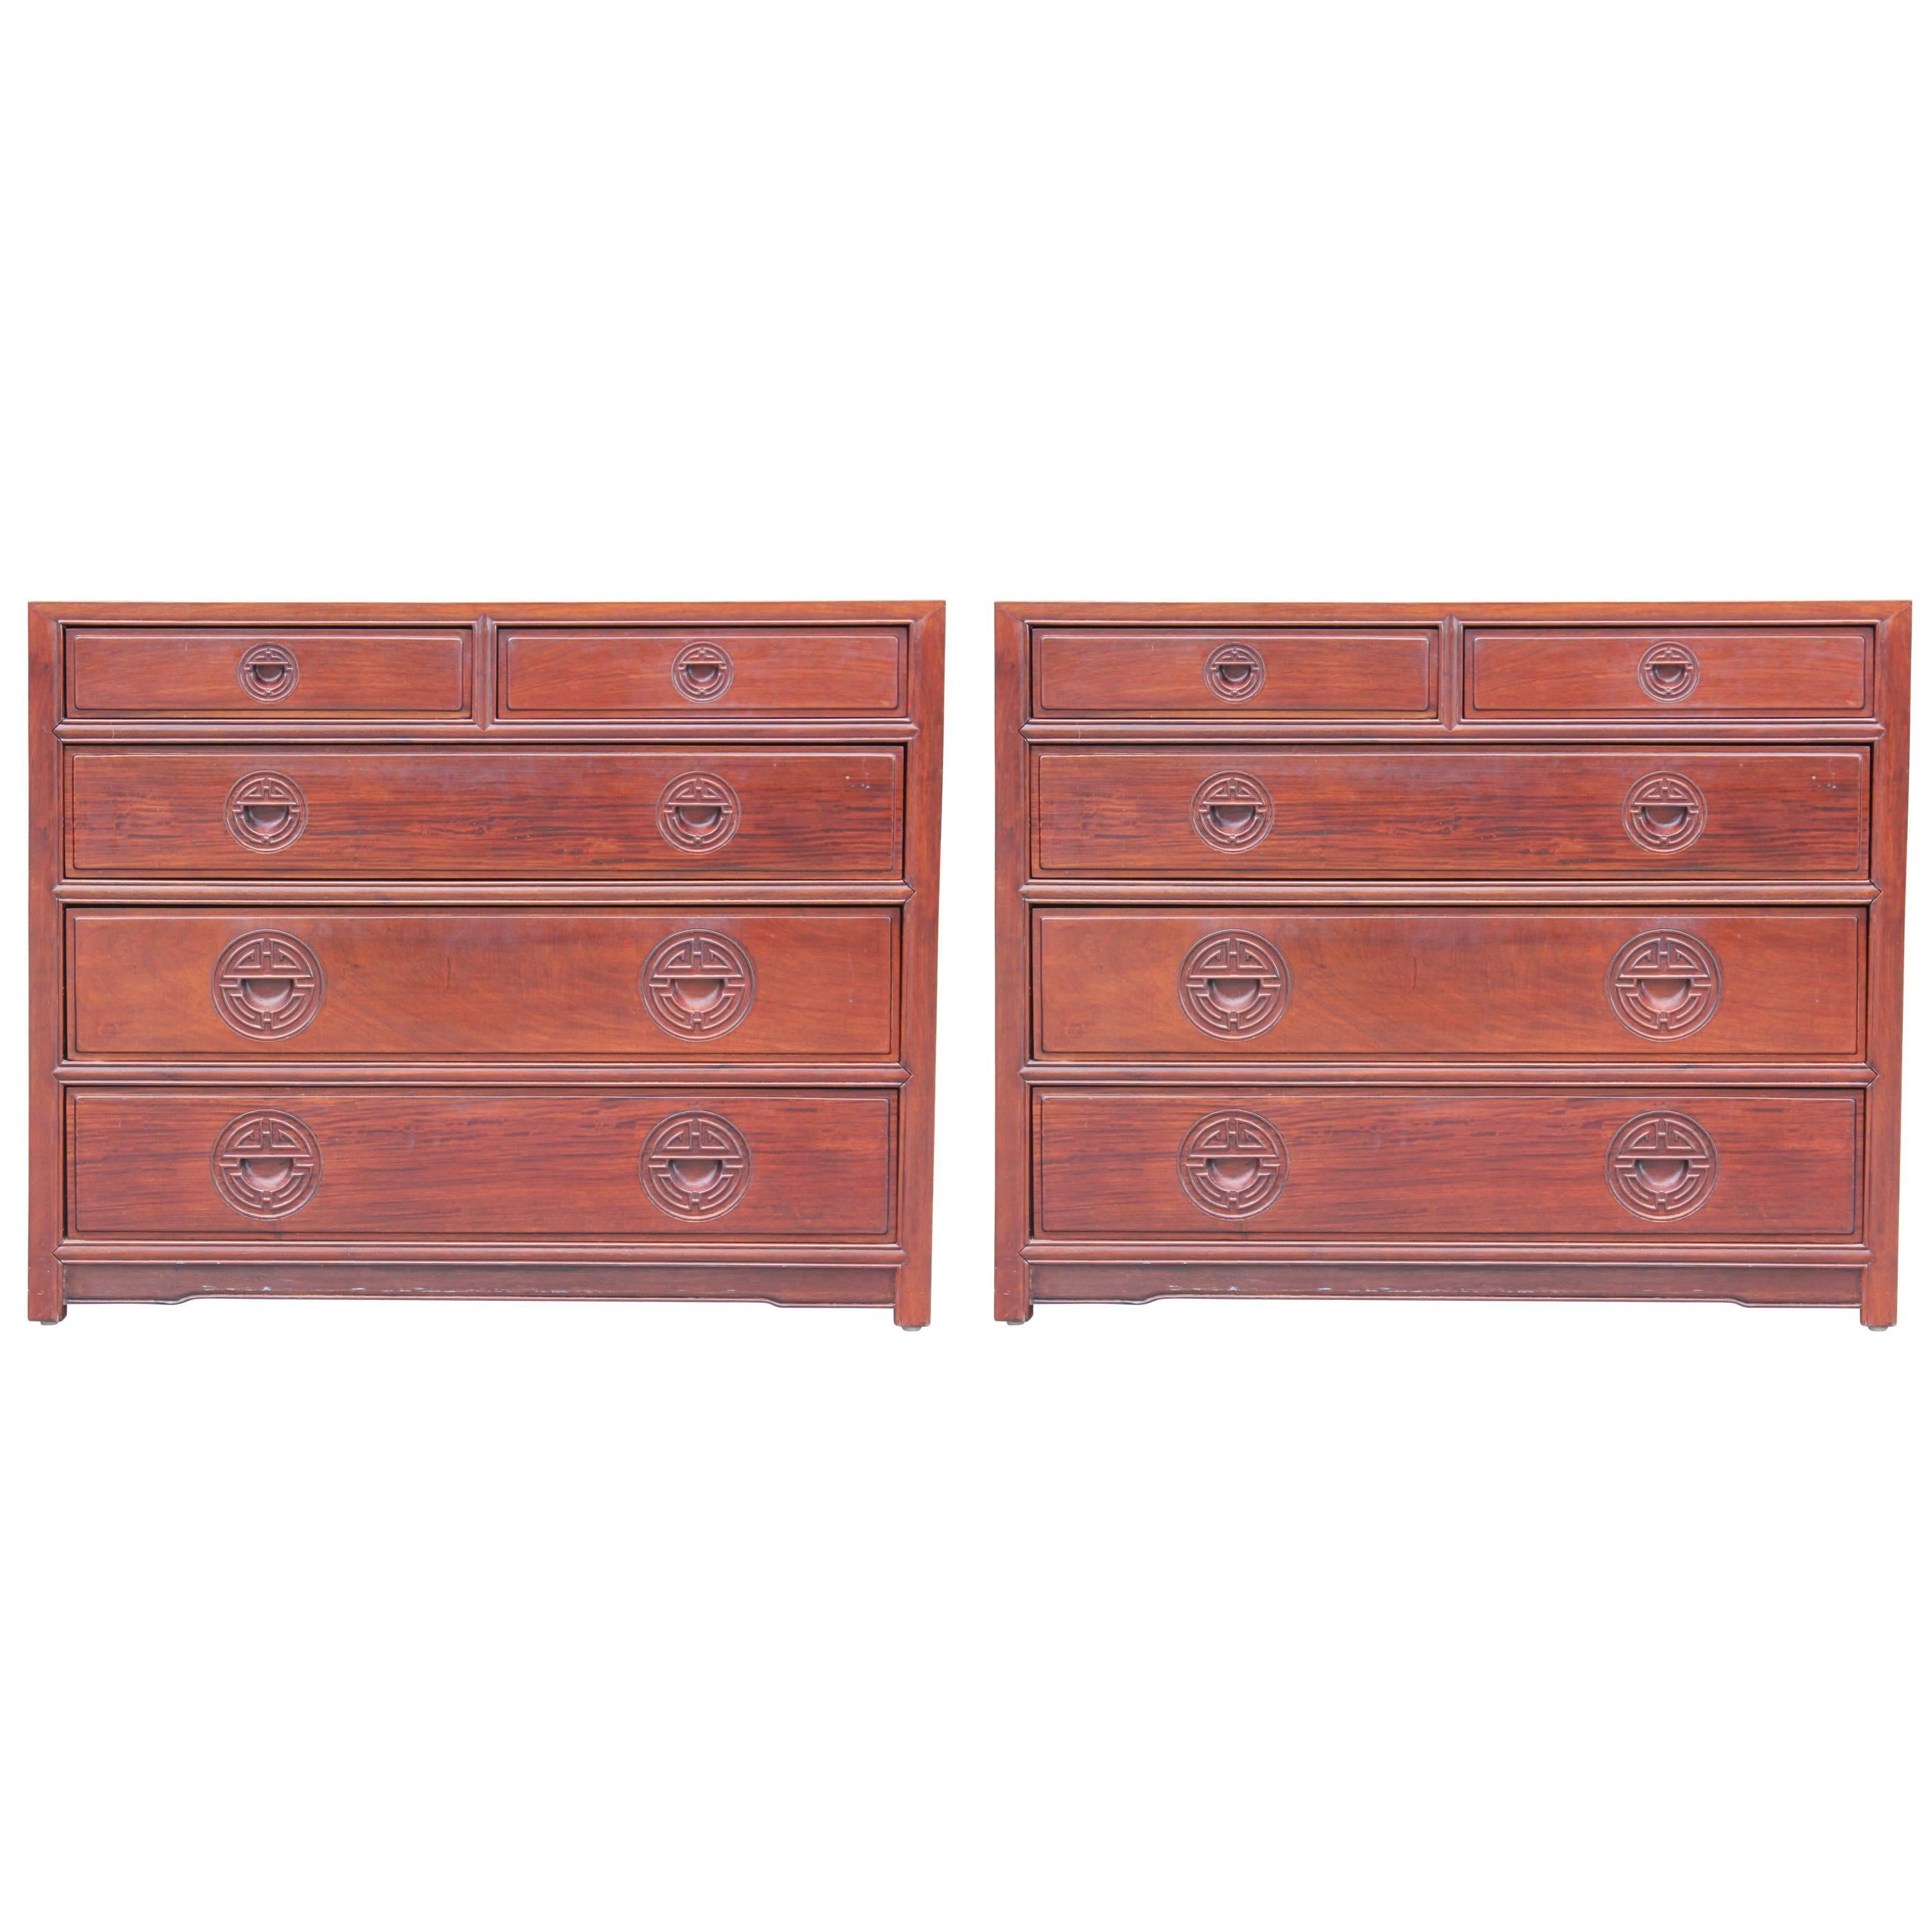 Matching Pair of Modern Chinoiserie Asian / Oriental Mahogany Bachelor Chests